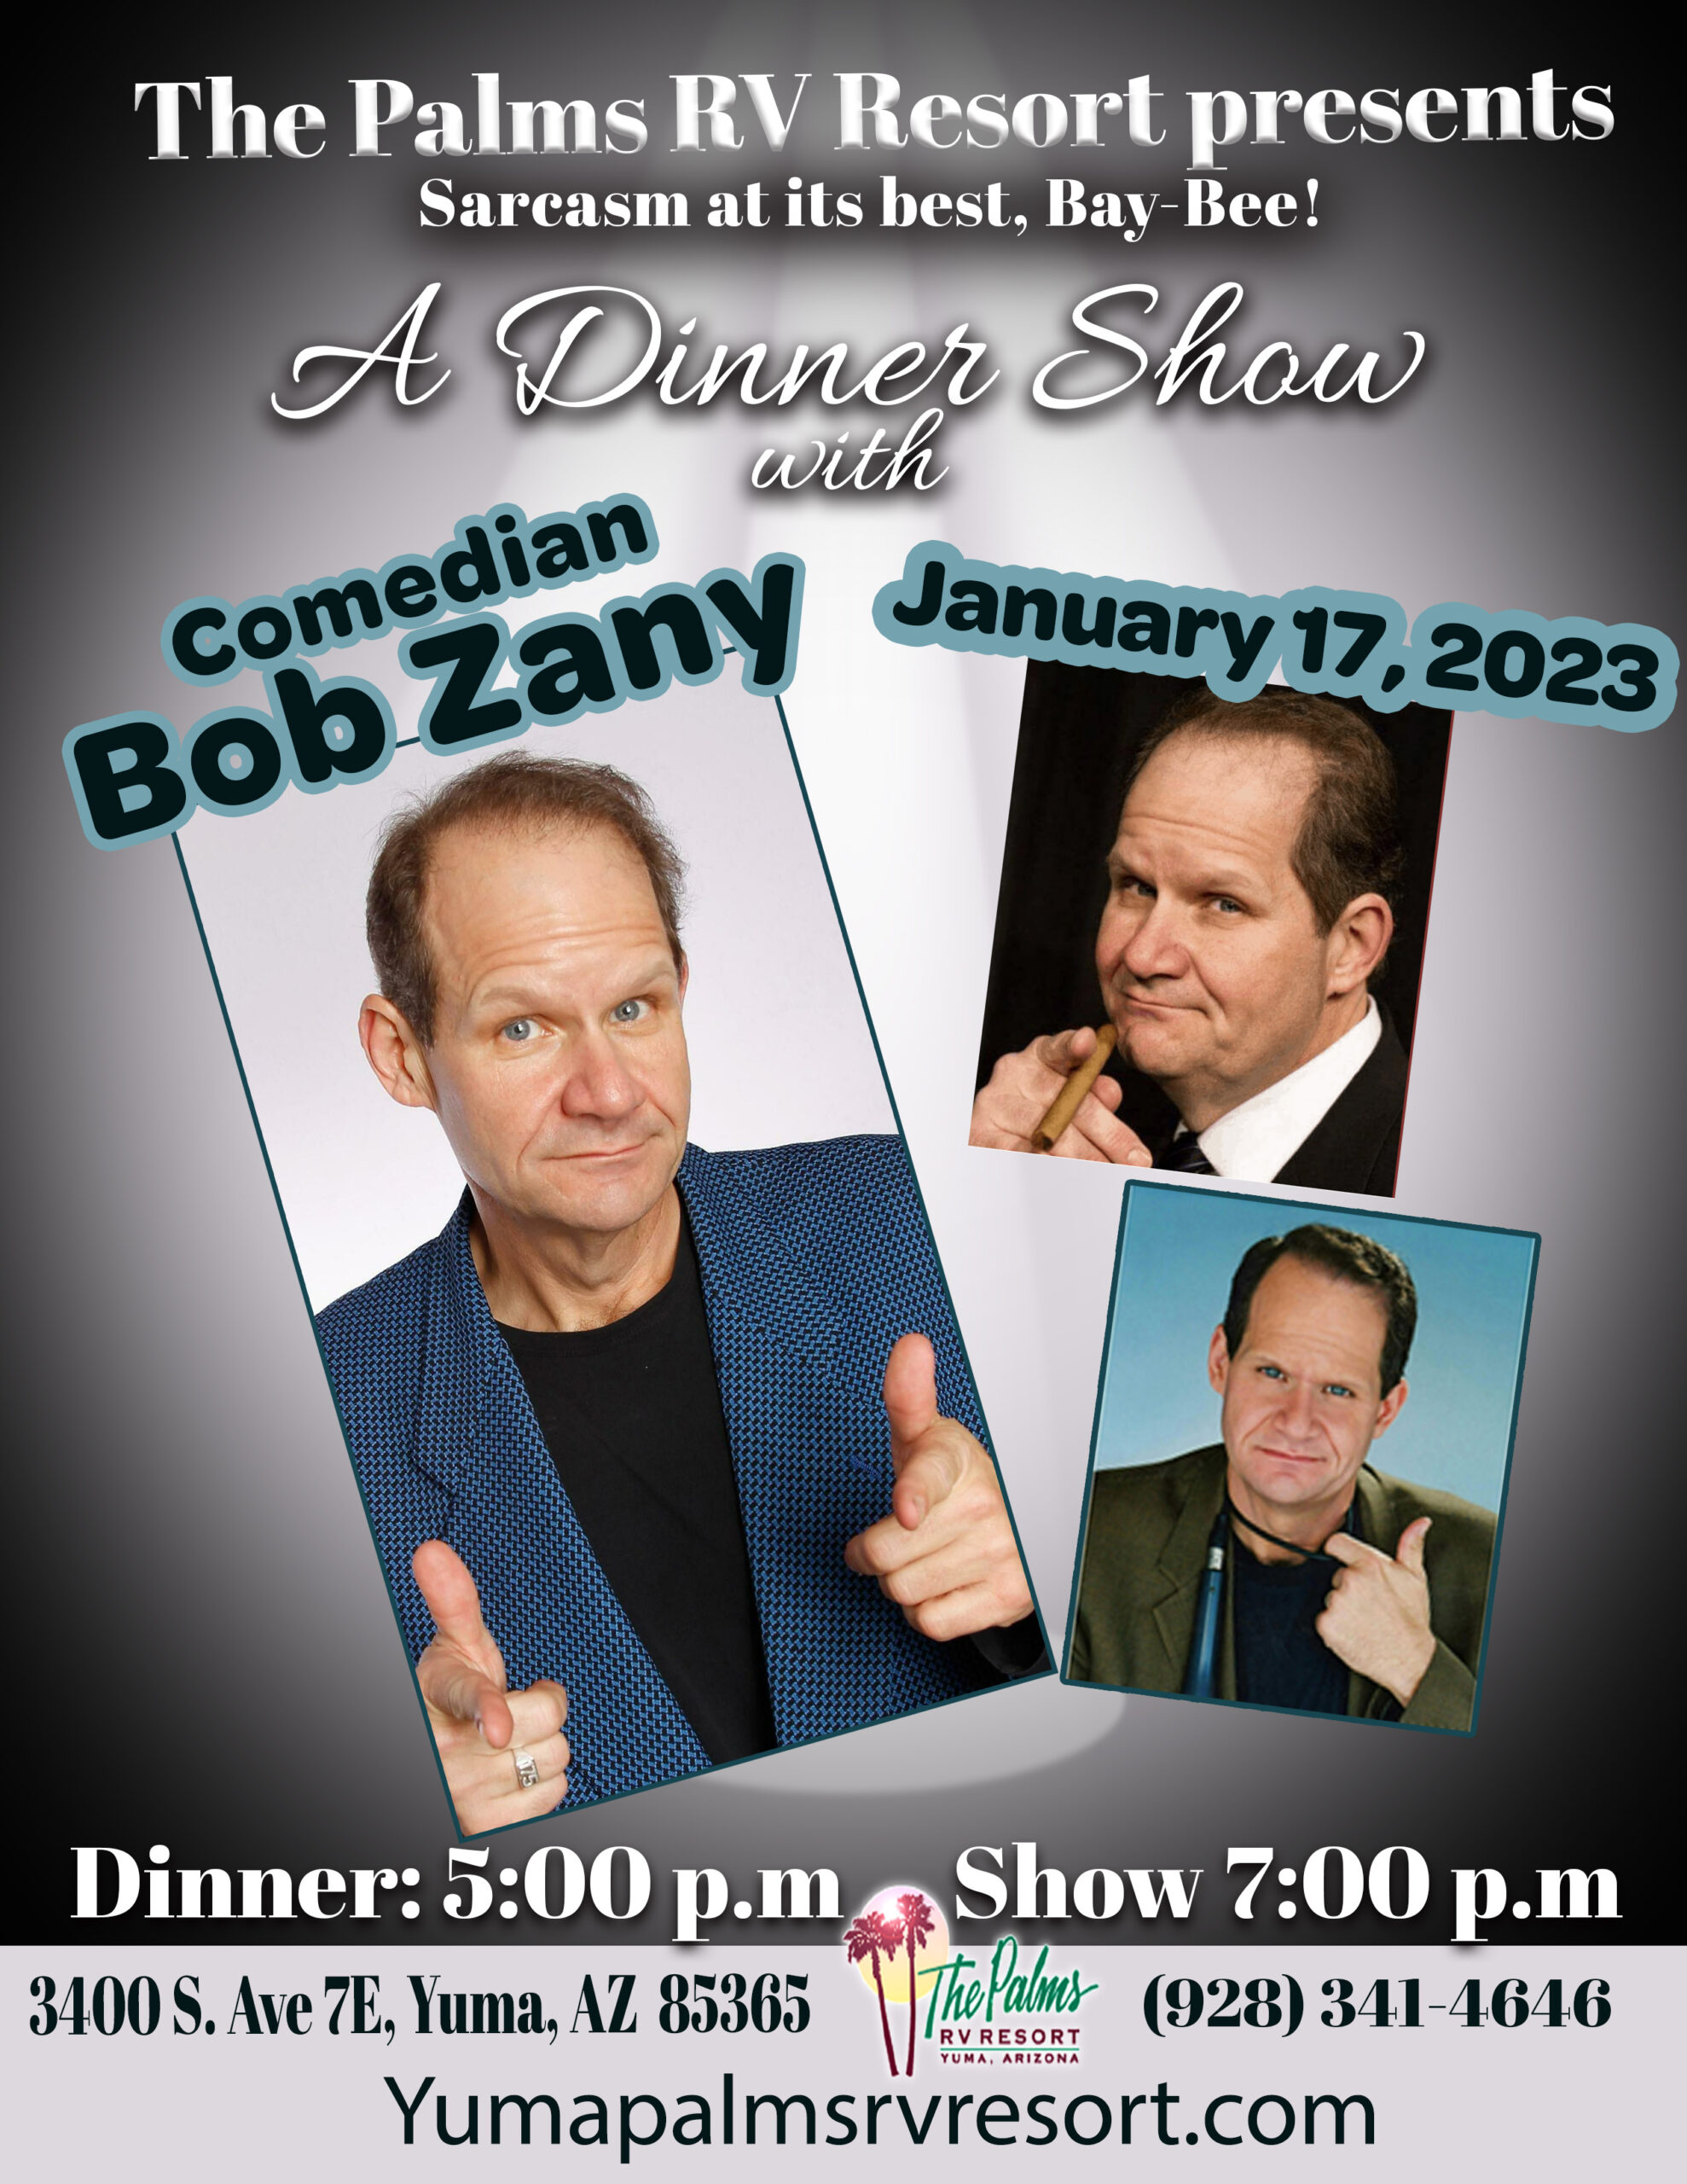 A Dinner Show with Comedian Bob Zany » The Palms RV Resort